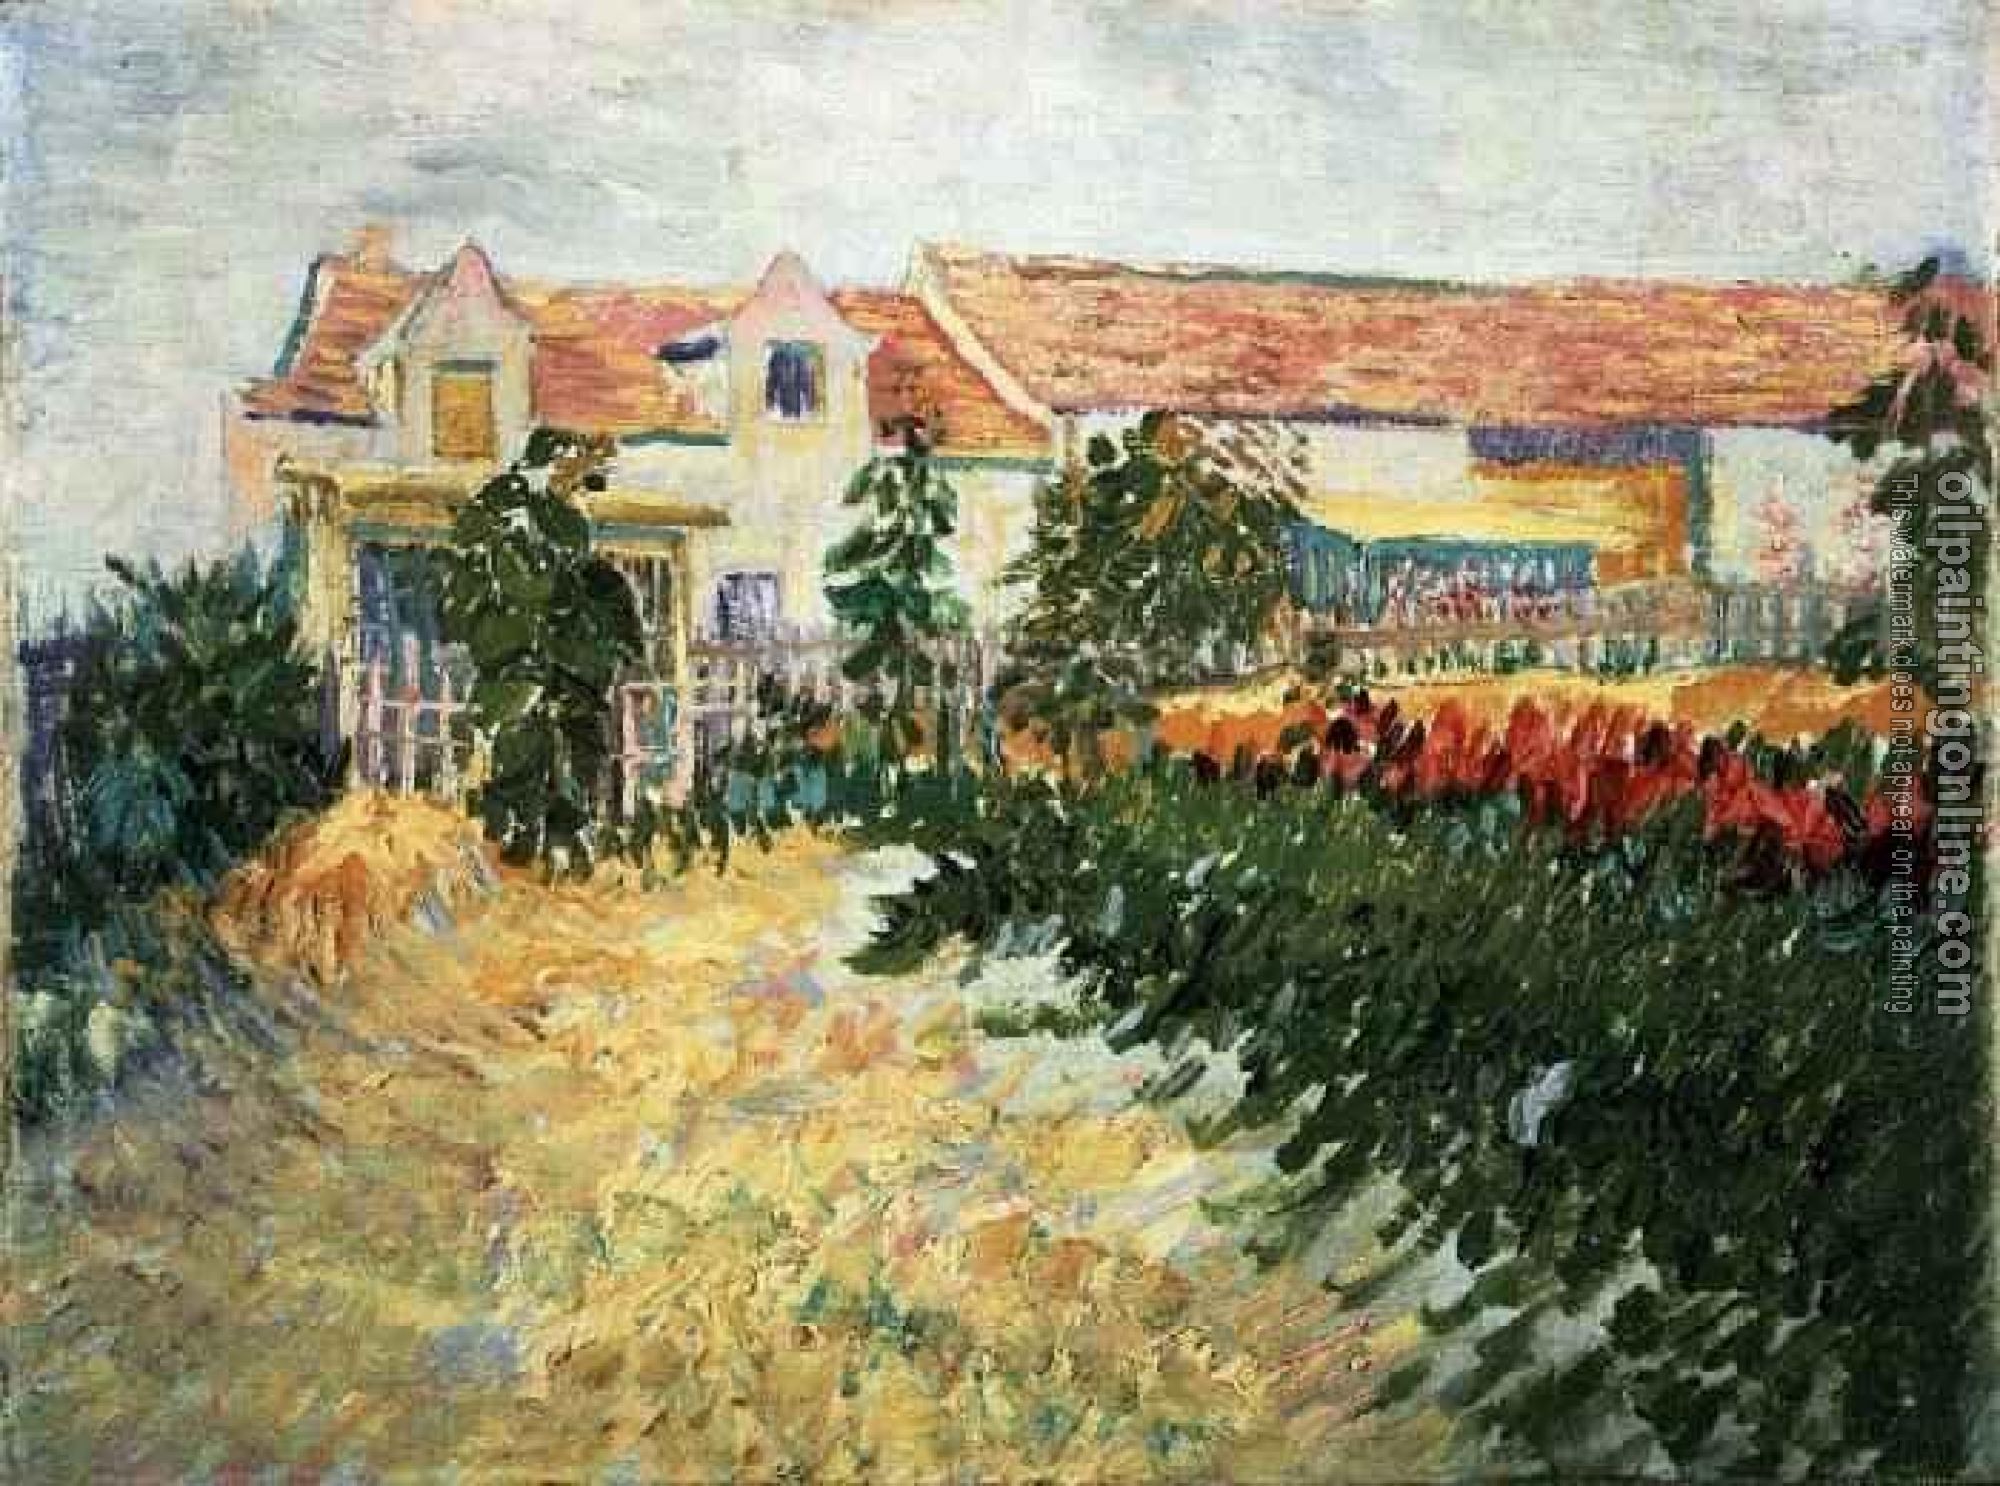 Gogh, Vincent van - House with Sunflowers